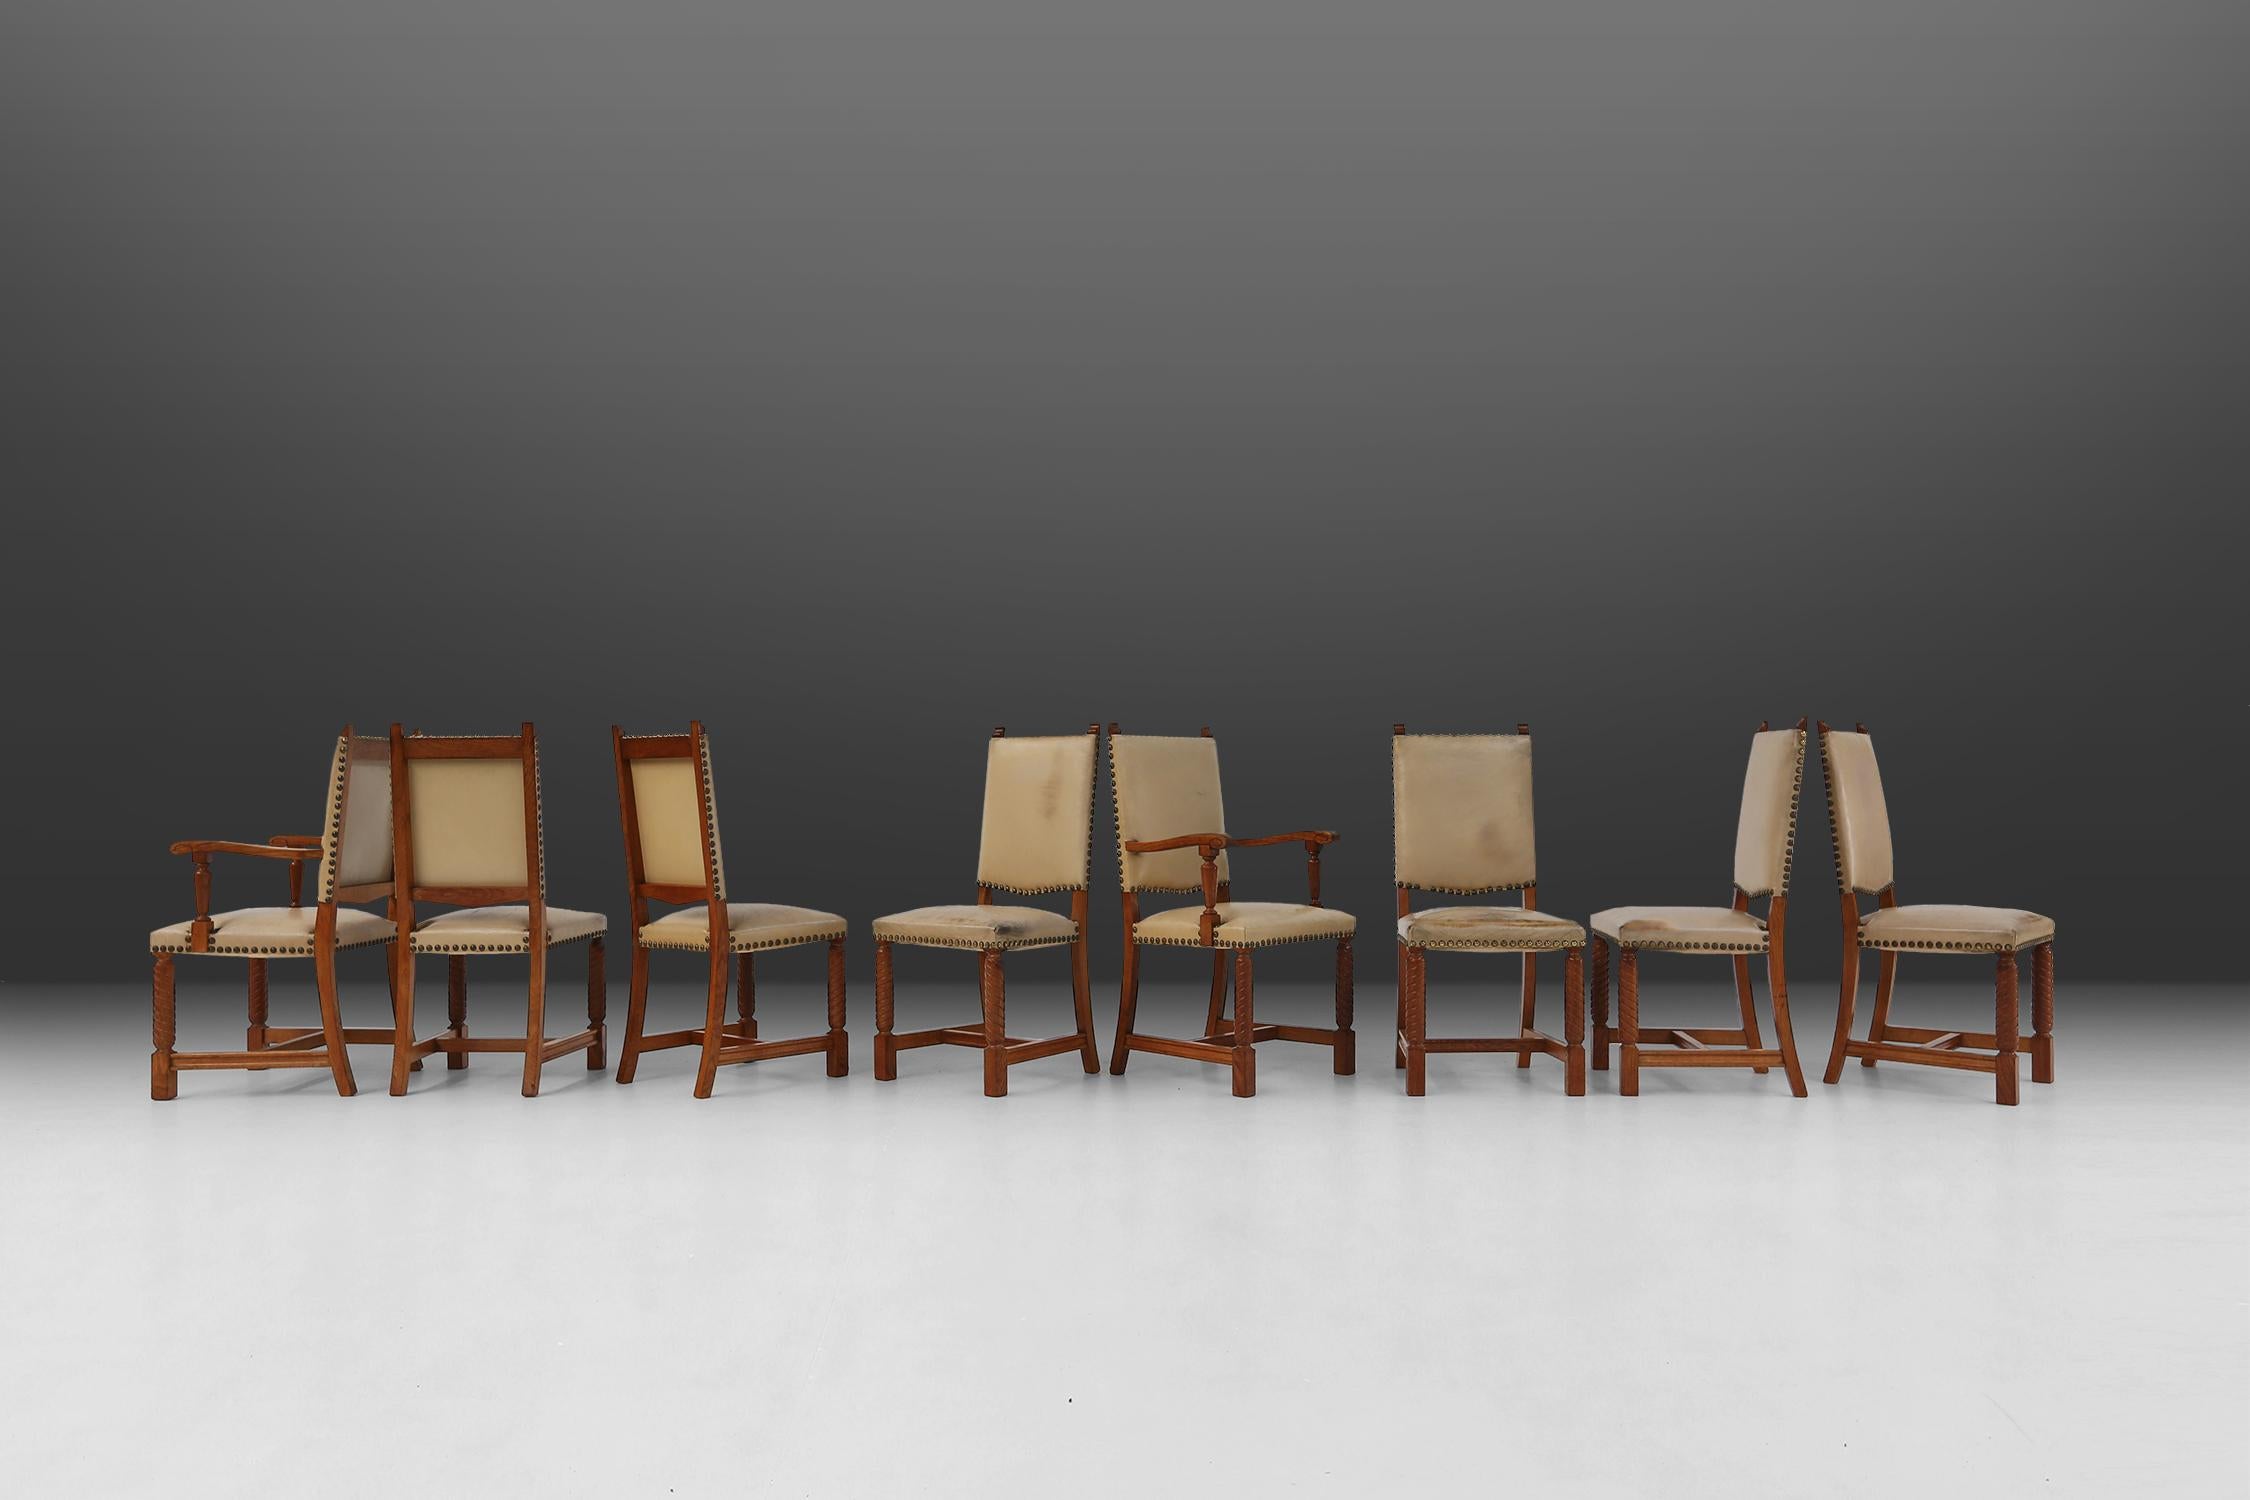 Belgian Art Deco dining room chairs made of solid oak and leather.
Beautiful designed dining room chairs that representing the Art Deco period of the 1940s. The robust chairs have turned legs and white leather seat and back with copper